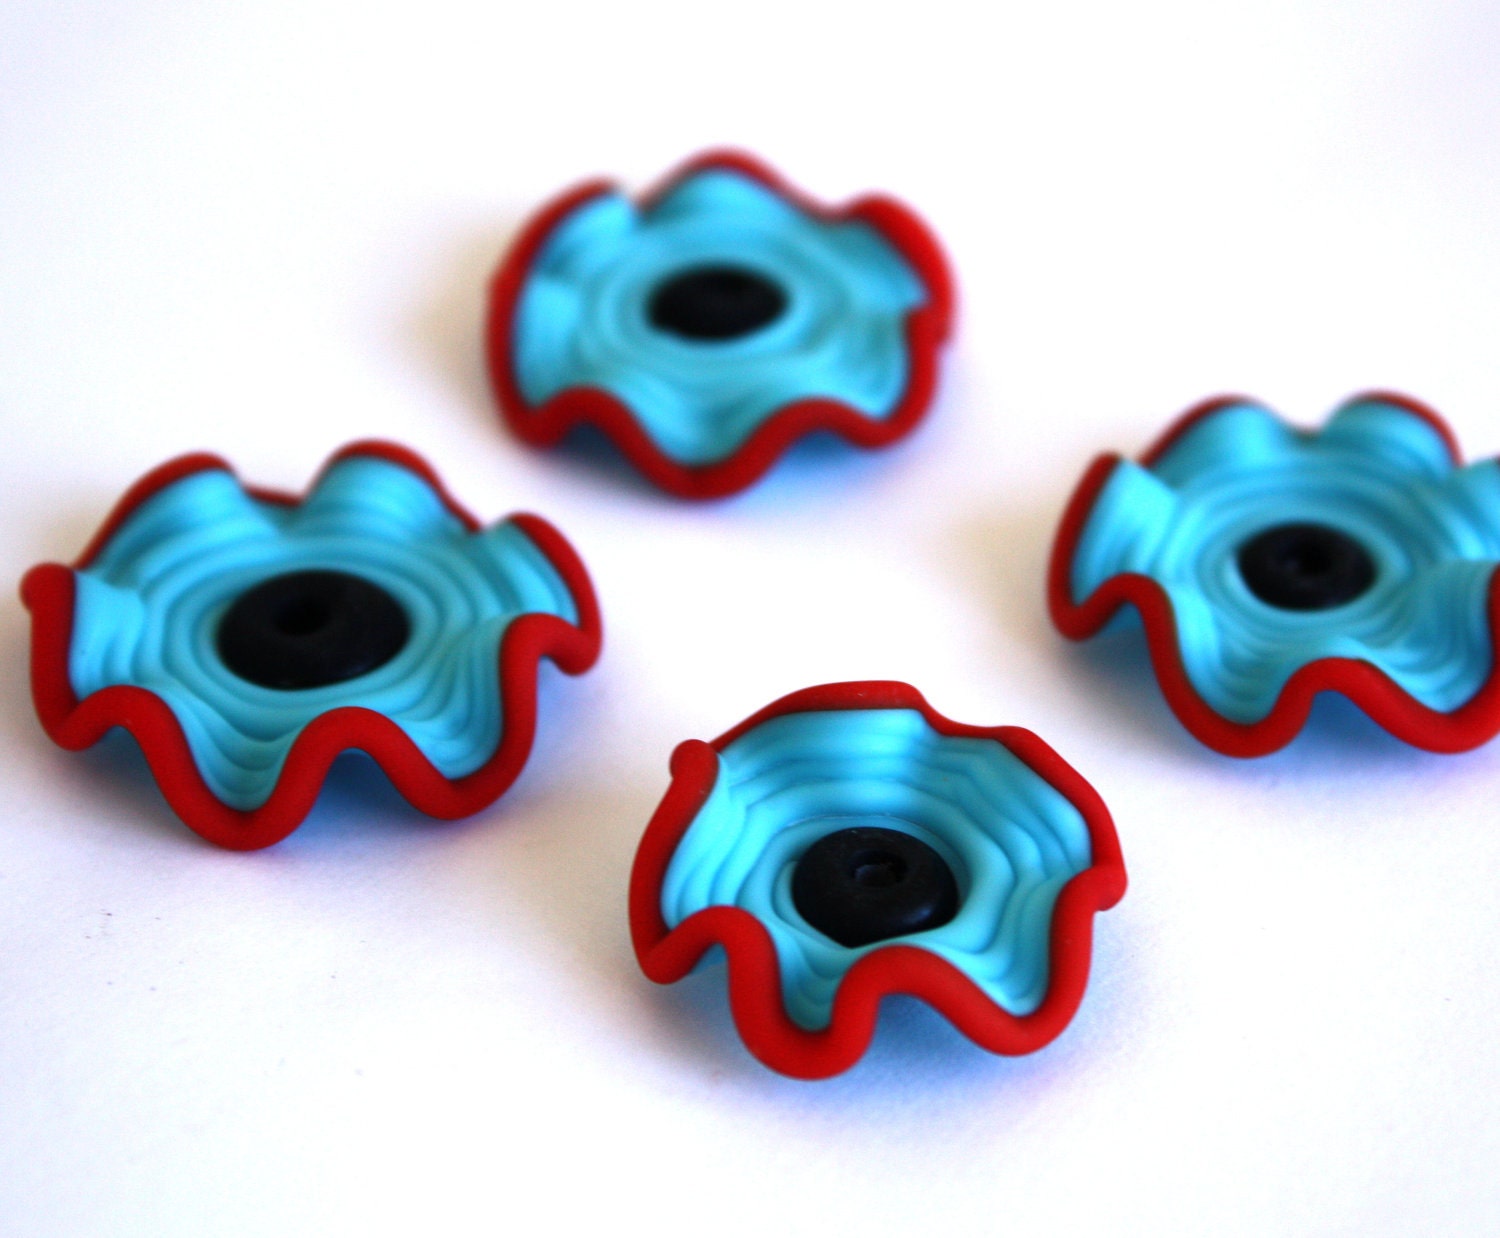 Handmade Lampwork Beads lampwork bead ruffle set  bead set of 4 SRA glass beads Frosted Red Black Turquoise Blue